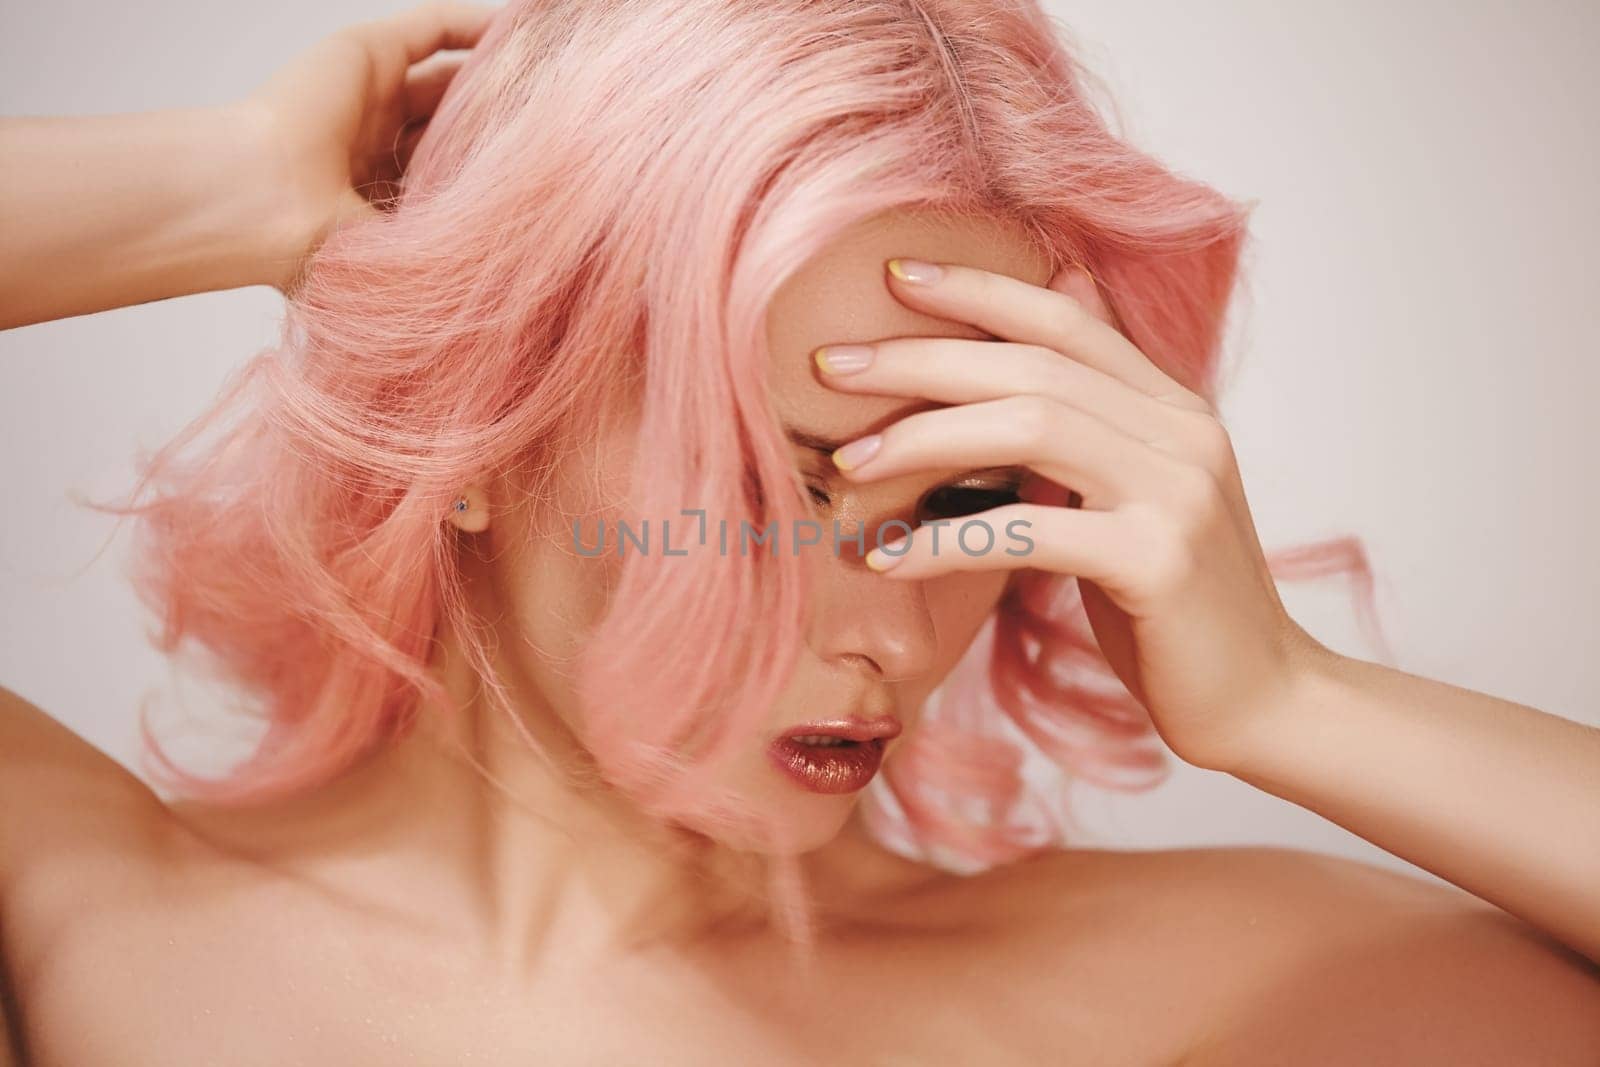 Soft-Girl with Trend Blond Pink Flying Hair, Fashion Make-up. Flying Hairstyle with Coloring. Summer or Spring Style for Woman